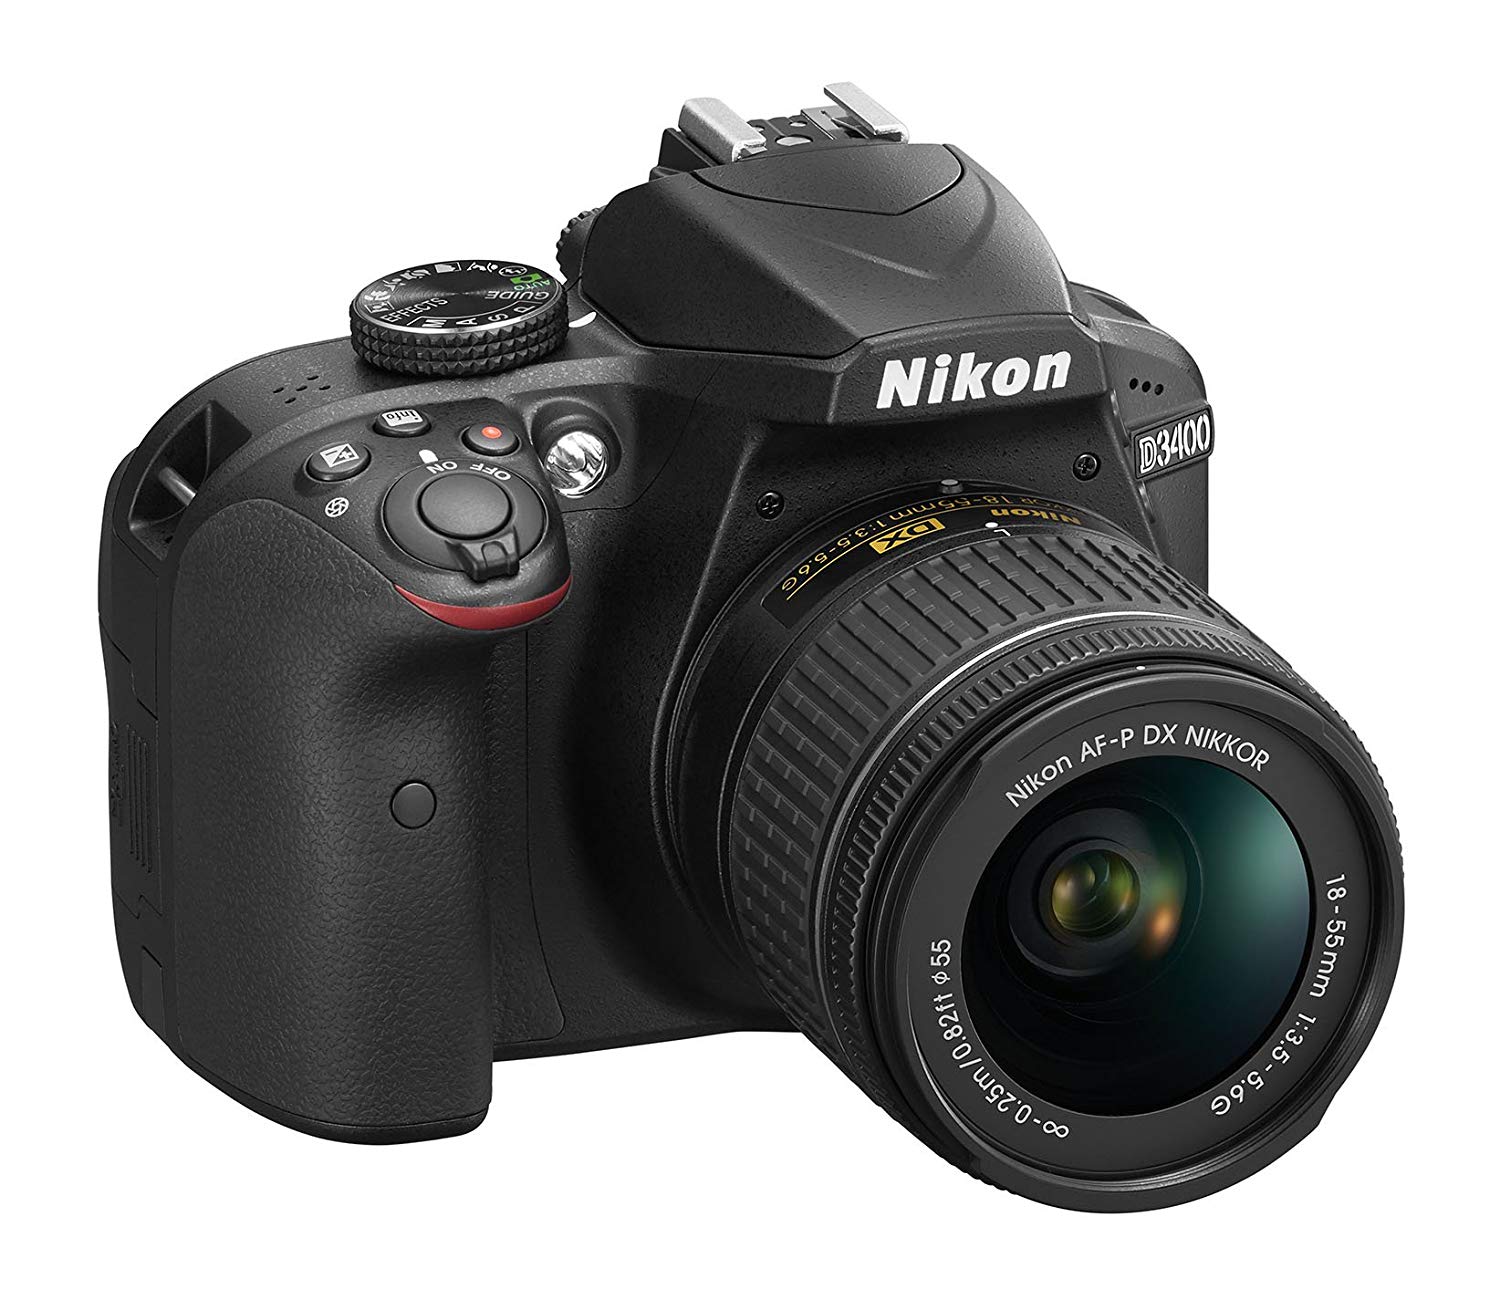 Nikon Philippines - “The Nikon D3400 is the best entry-level DSLR for those  looking to improve their photography and learn the ins and outs of tweaking  camera settings. The D3400 has some